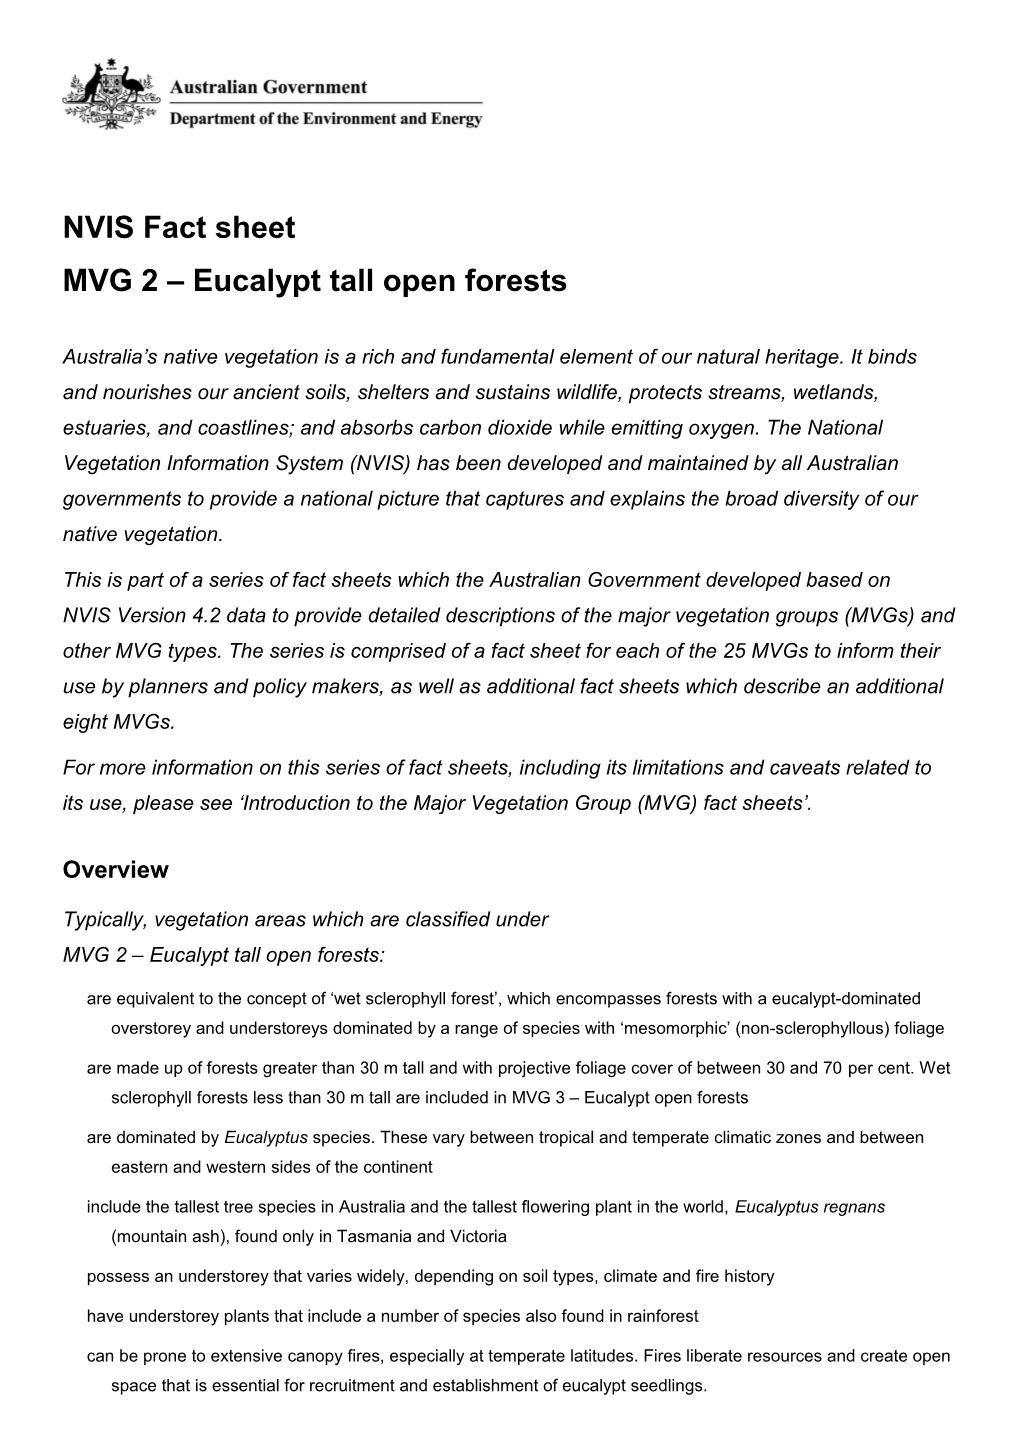 NVIS Fact Sheet MVG 2 Eucalypt Tall Open Forests